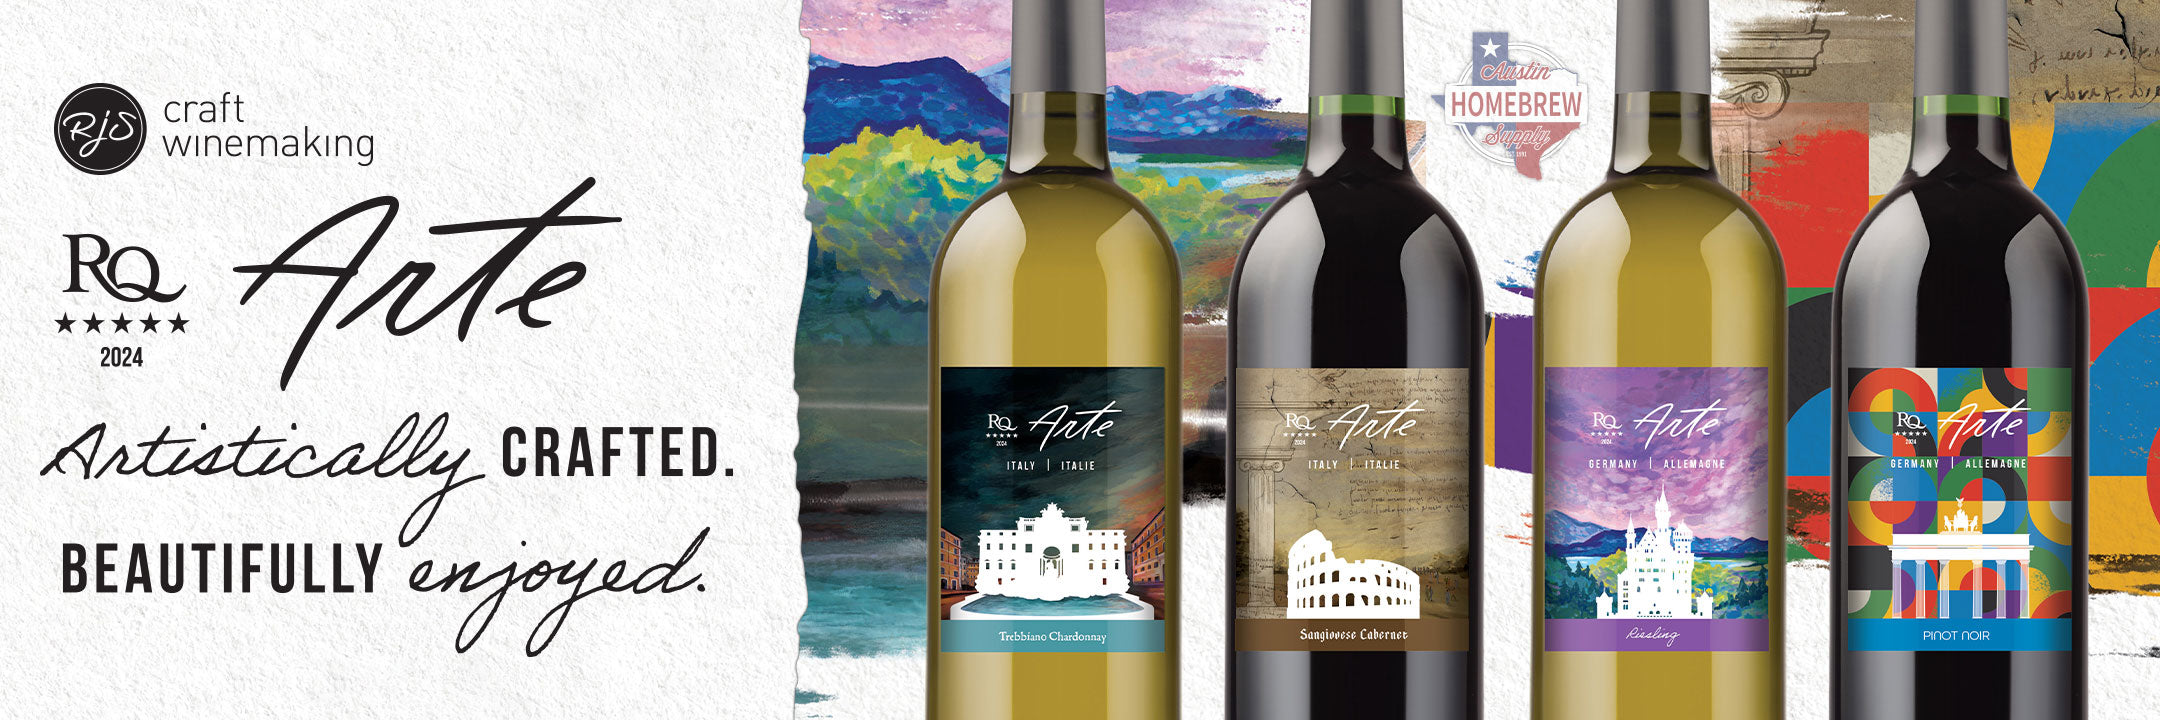 RJS Craft Winemaking RQ2024 Arte Collection of Wines is now available for preorder.